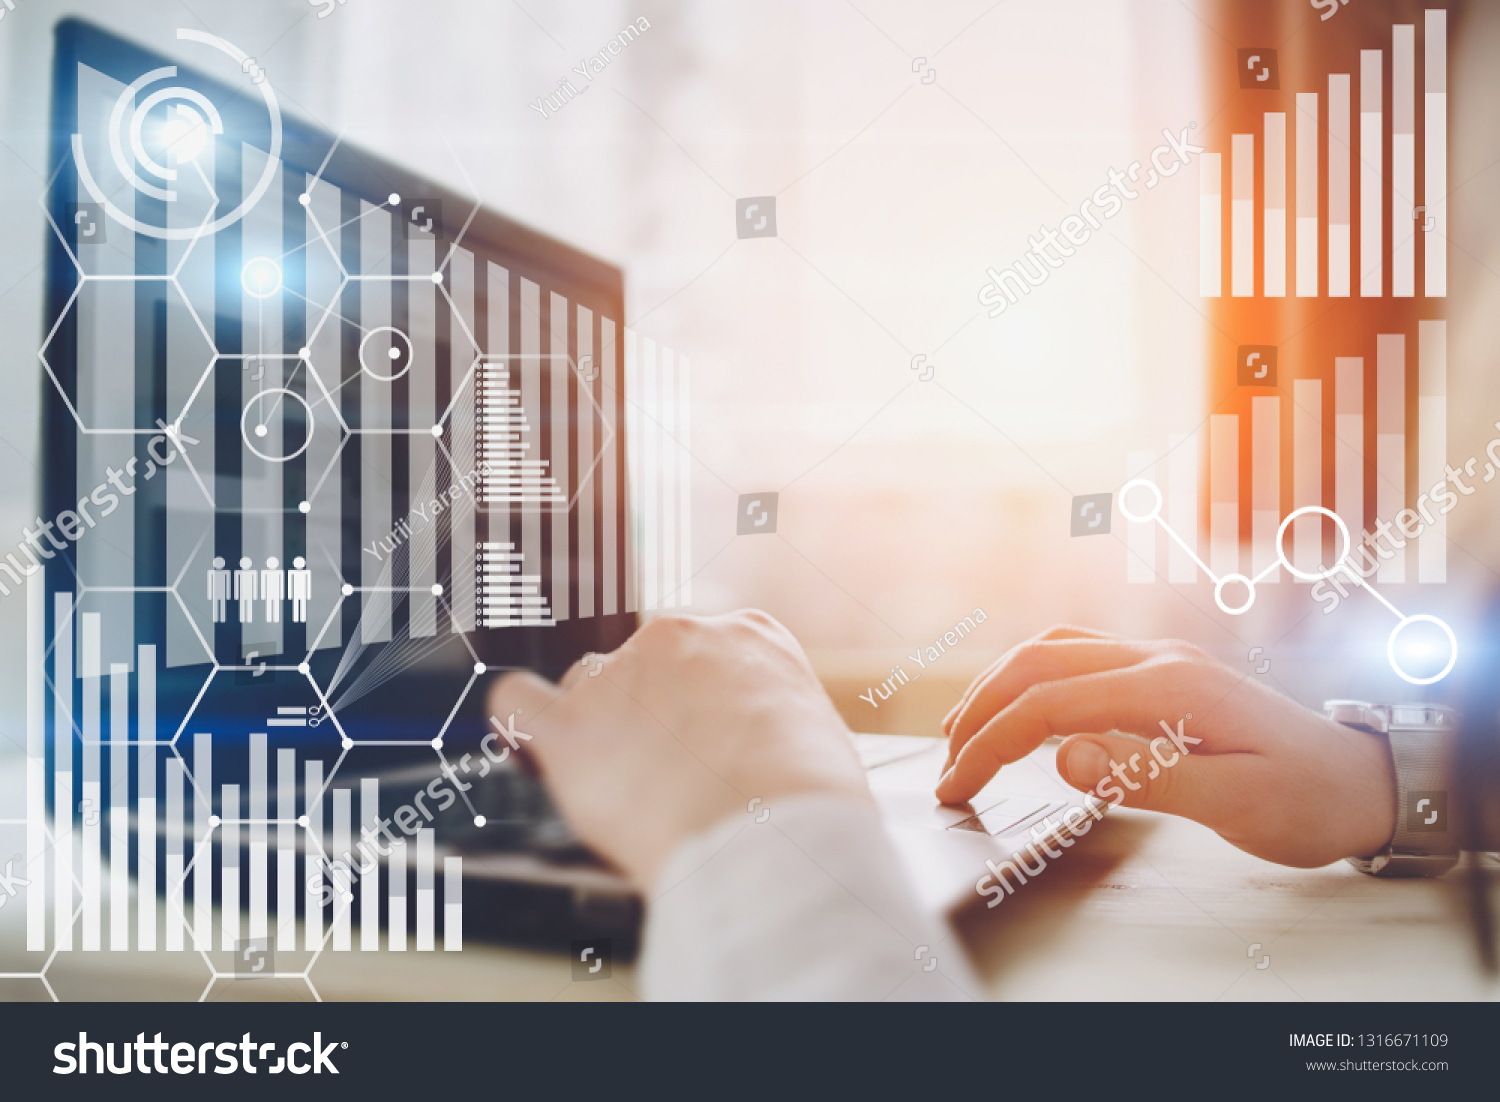 Woman hands typing on dock keyboard contemporary electronic tablet. Concept of virtual diagram,graph interfaces,digital display,connections,statistics icons. New ideas with innovation and creativity #1316671109